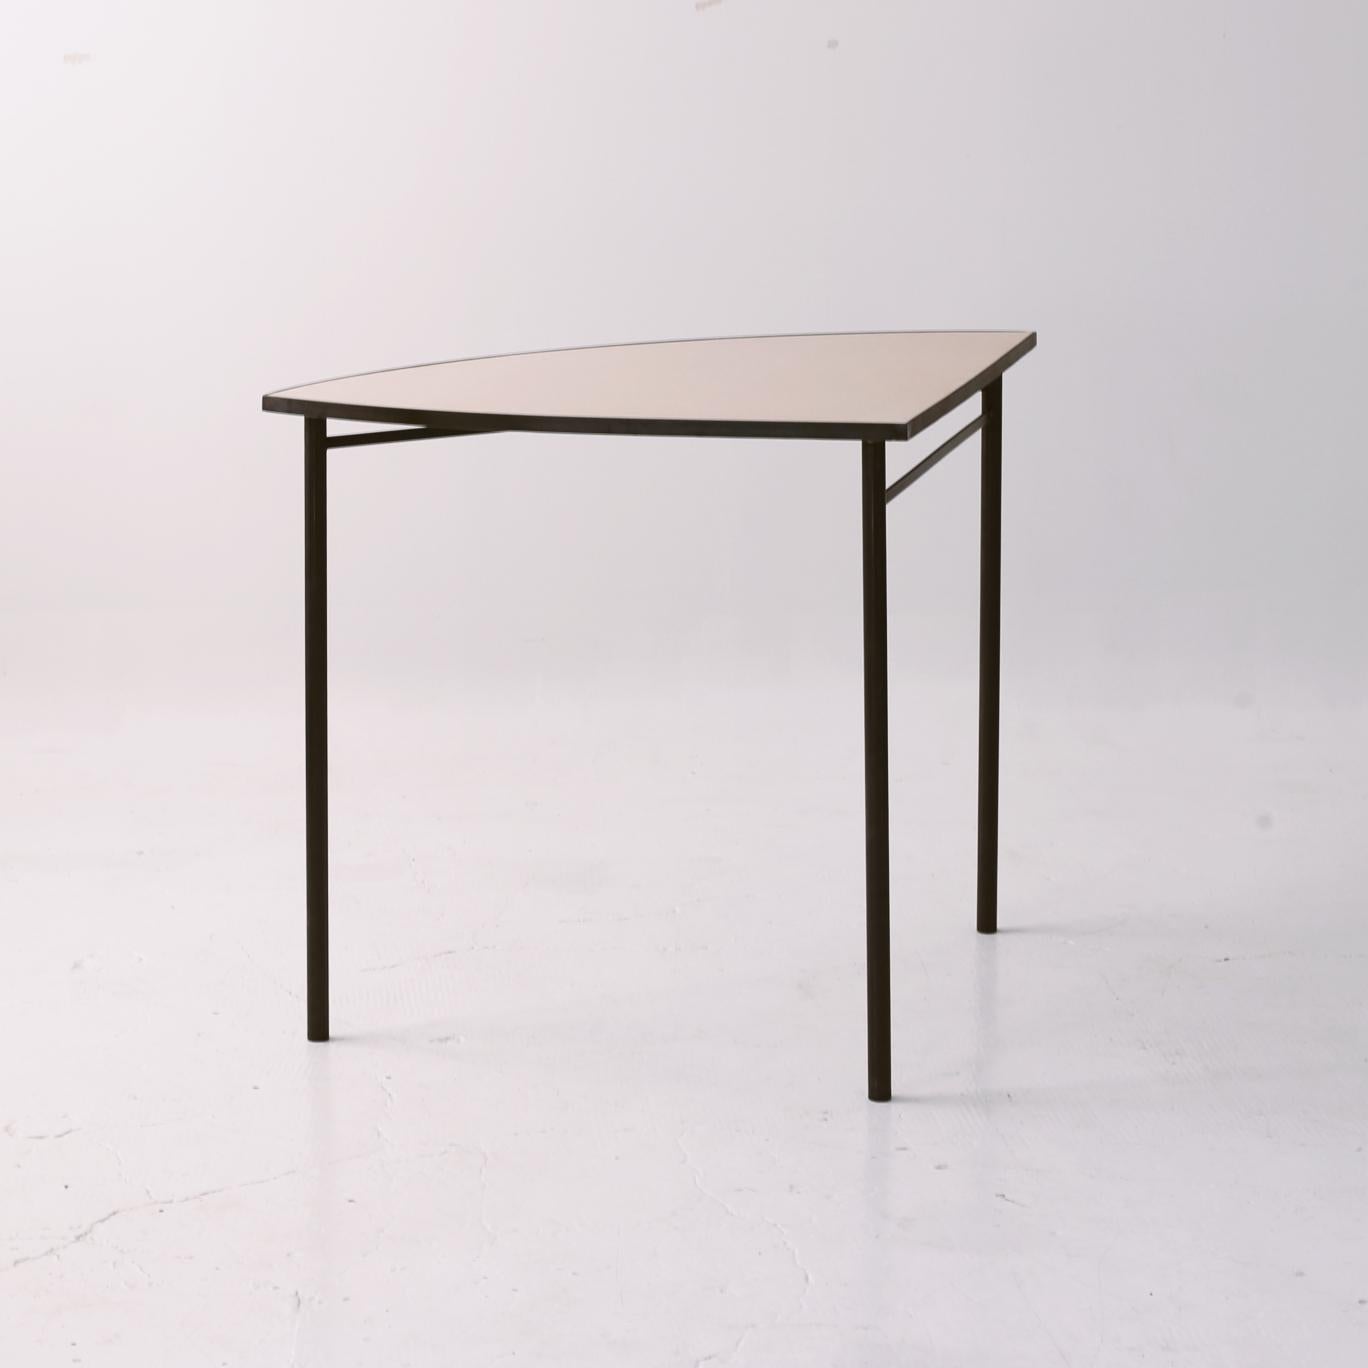 Piece A TABULA [non] RASA Table by Studio Traccia
Dimensions: W 80 x D 80 x H 74 cm
Materials: Steel.
Different combinations are available

The table was designed for our installation called tabula[non]rasa developed for Milan Design Week 2021,